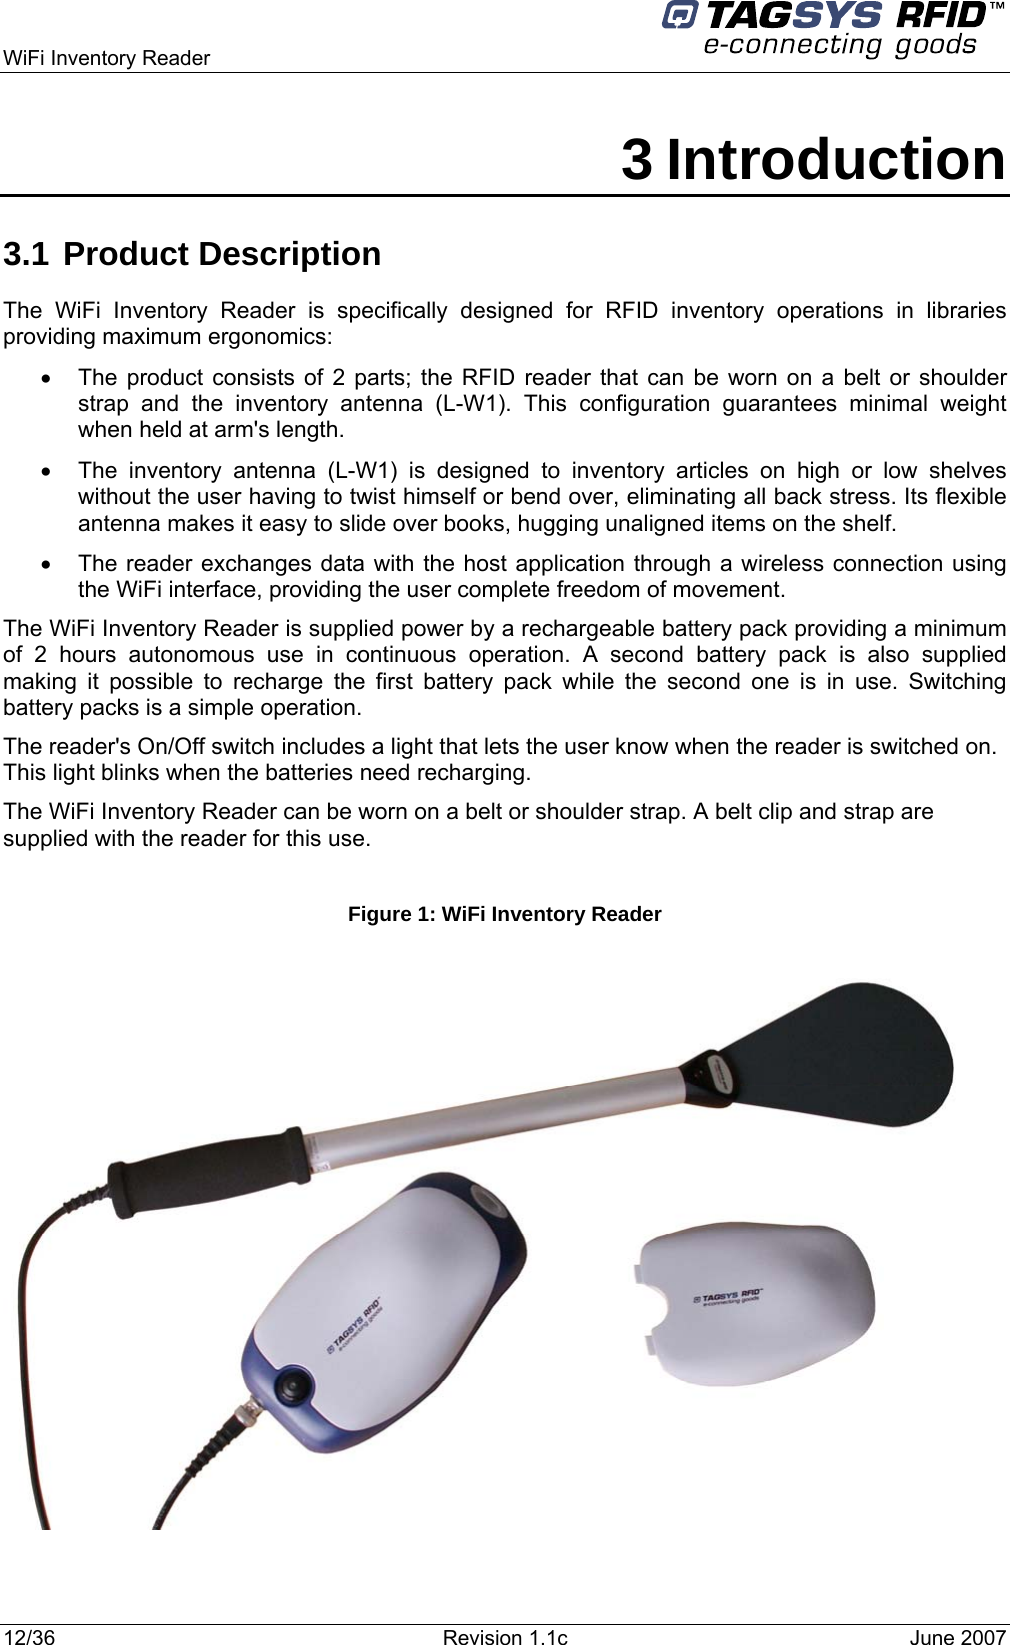  WiFi Inventory Reader     3 Introduction 3.1 Product Description The WiFi Inventory Reader is specifically designed for RFID inventory operations in libraries providing maximum ergonomics: •  The product consists of 2 parts; the RFID reader that can be worn on a belt or shoulder strap and the inventory antenna (L-W1). This configuration guarantees minimal weight when held at arm&apos;s length.  •  The inventory antenna (L-W1) is designed to inventory articles on high or low shelves without the user having to twist himself or bend over, eliminating all back stress. Its flexible antenna makes it easy to slide over books, hugging unaligned items on the shelf. •  The reader exchanges data with the host application through a wireless connection using the WiFi interface, providing the user complete freedom of movement.  The WiFi Inventory Reader is supplied power by a rechargeable battery pack providing a minimum of 2 hours autonomous use in continuous operation. A second battery pack is also supplied making it possible to recharge the first battery pack while the second one is in use. Switching battery packs is a simple operation. The reader&apos;s On/Off switch includes a light that lets the user know when the reader is switched on. This light blinks when the batteries need recharging. The WiFi Inventory Reader can be worn on a belt or shoulder strap. A belt clip and strap are supplied with the reader for this use.  Figure 1: WiFi Inventory Reader   12/36  Revision 1.1c  June 2007  